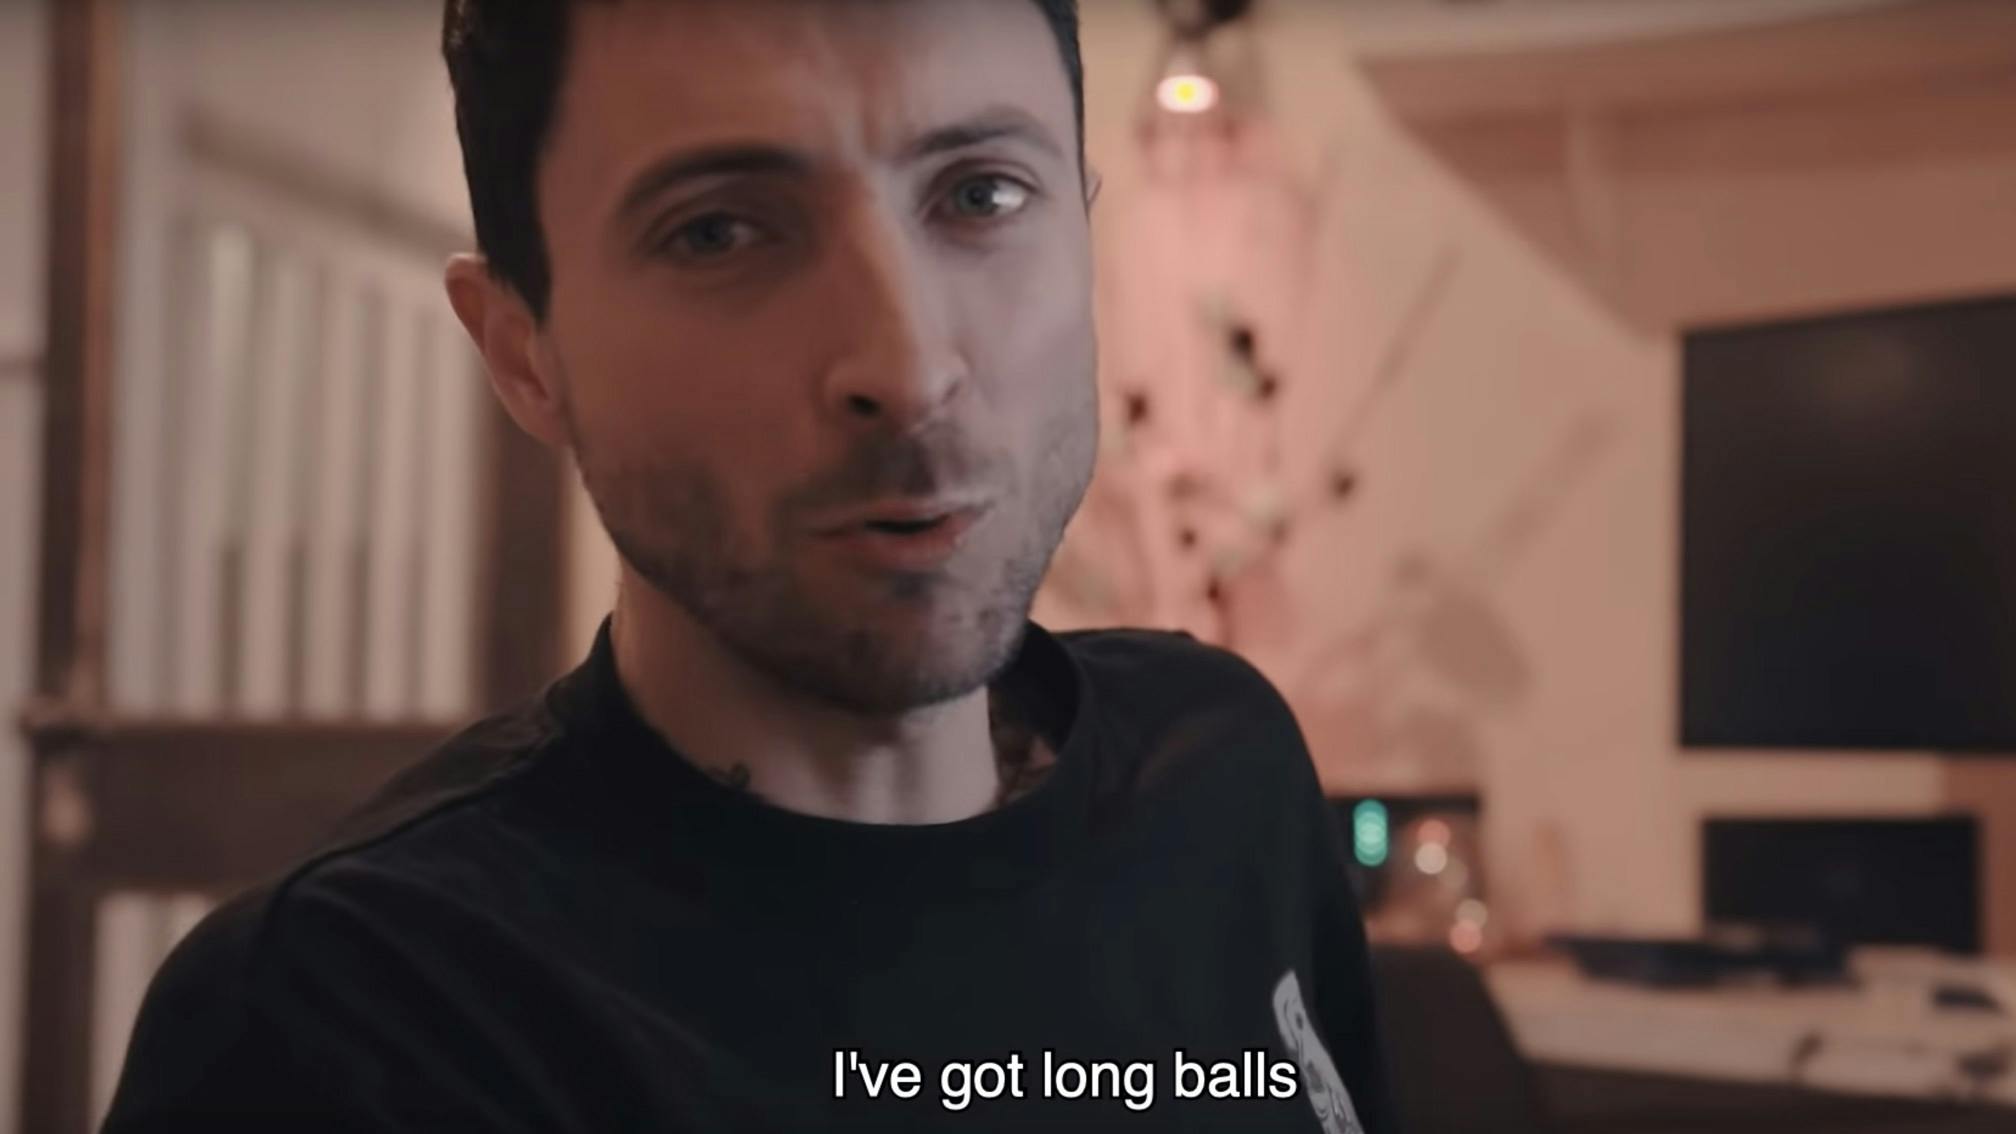 Jordan Fish Wants To Sing About His "Long Balls" On The New Bring Me The Horizon Album